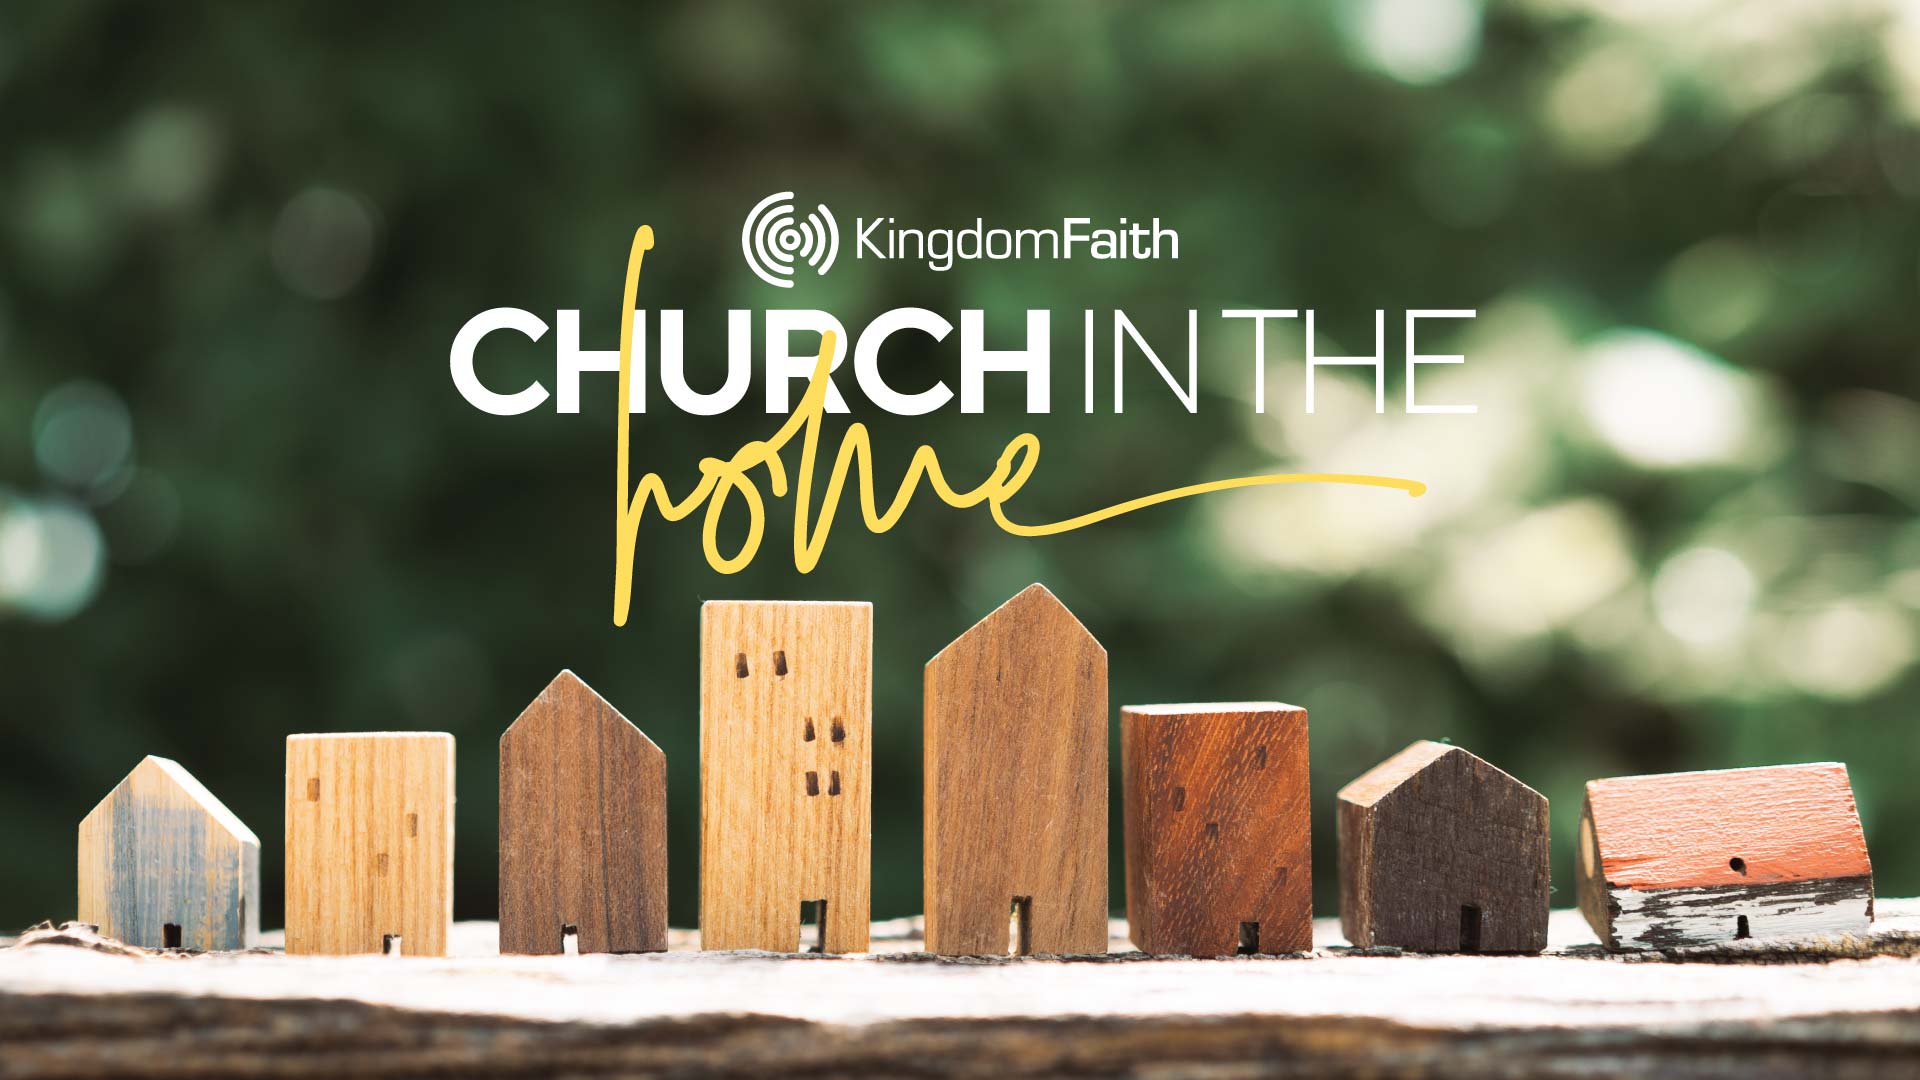 Church in the home - Sunday 03 Dec